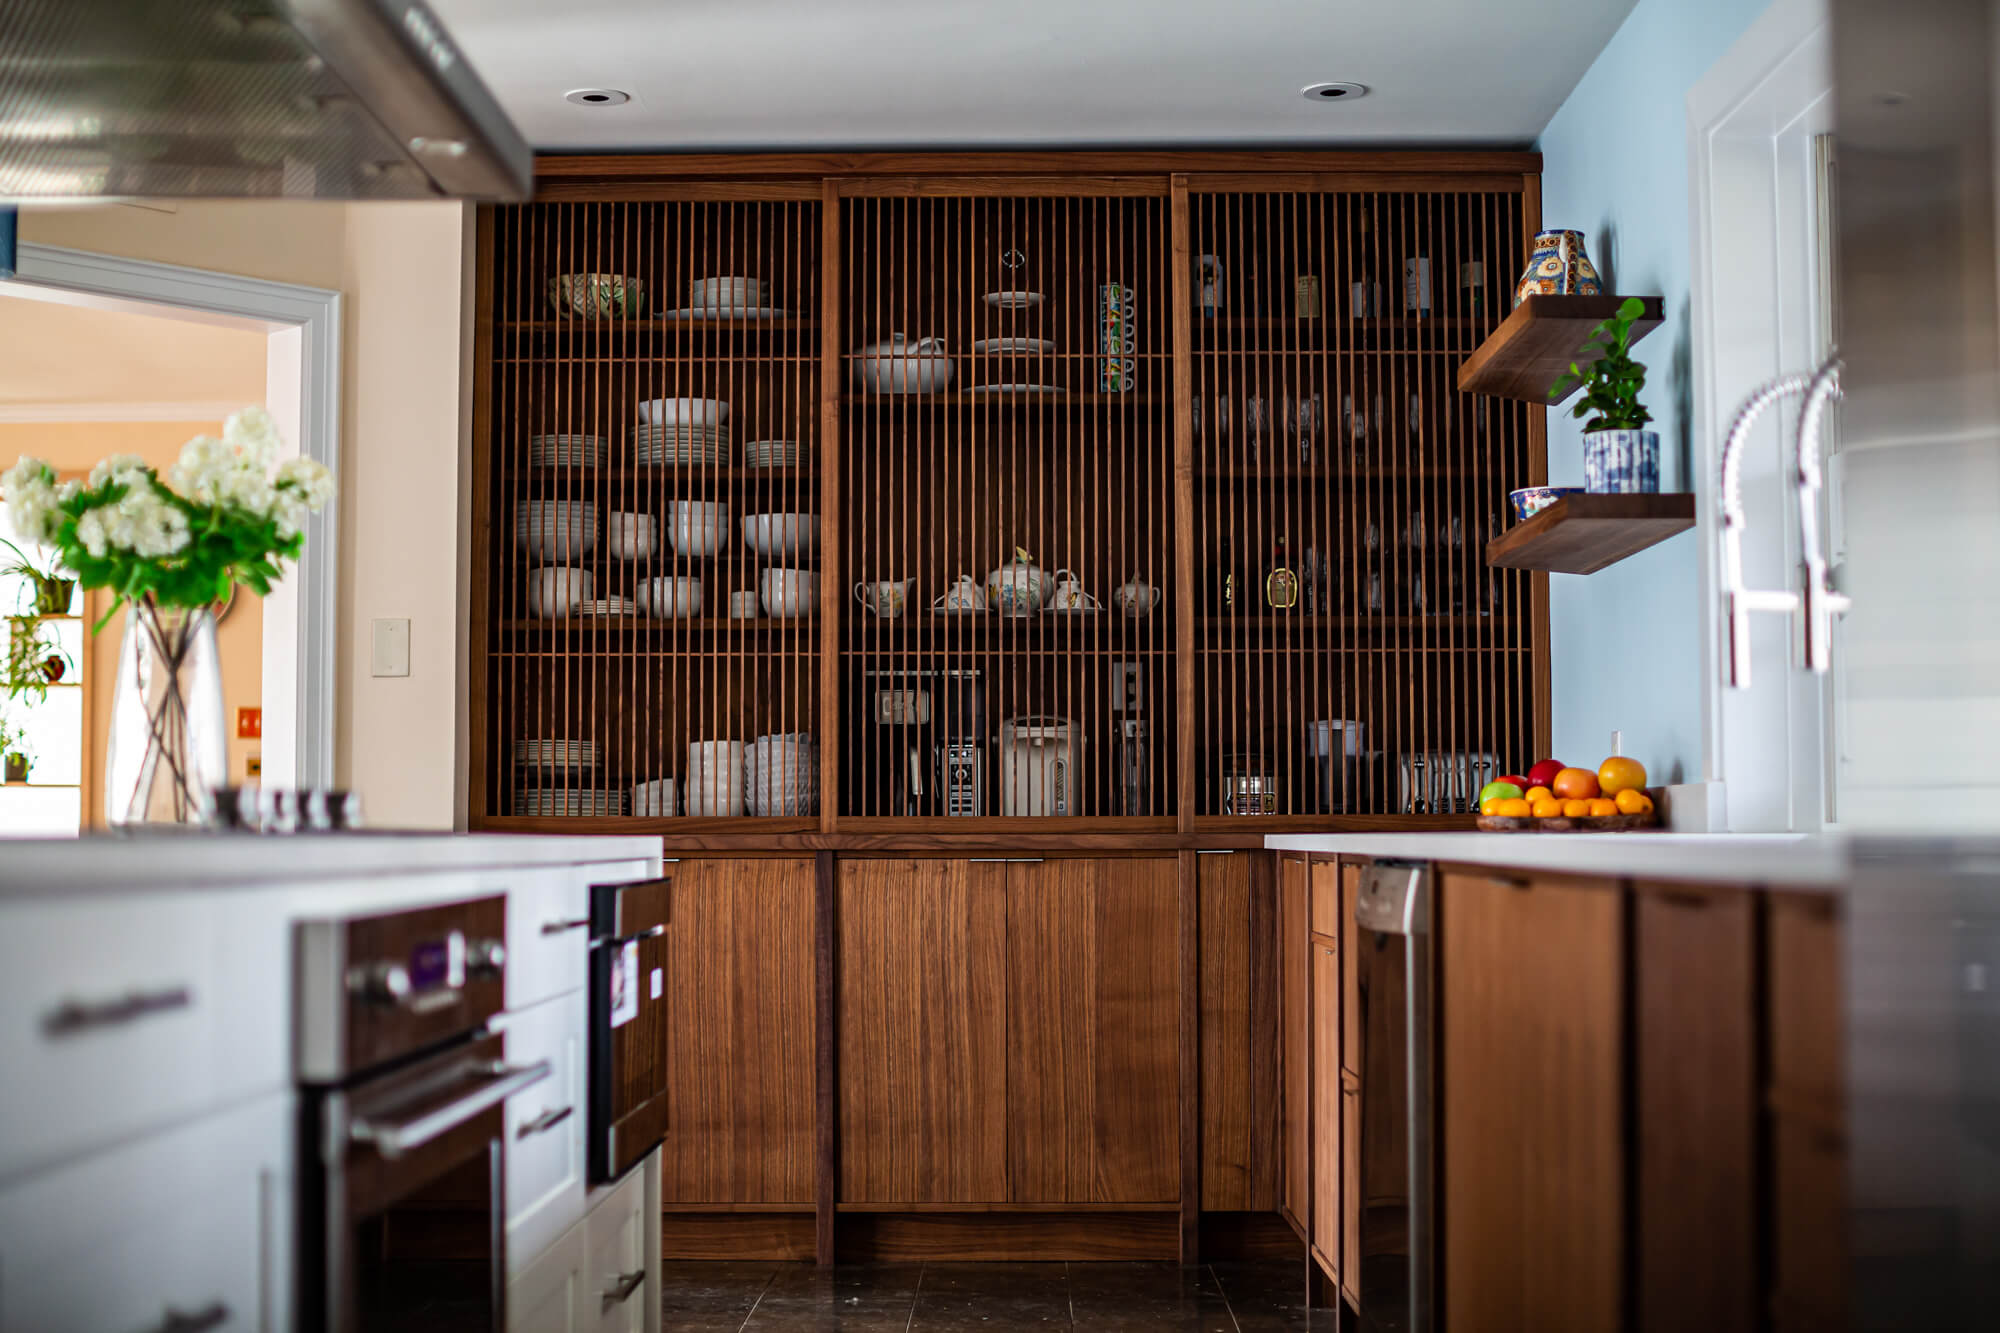 Walnut veneered kitchen with inspired by Japanese design finished with Rubio Monocoat hardwax oil wood finish.